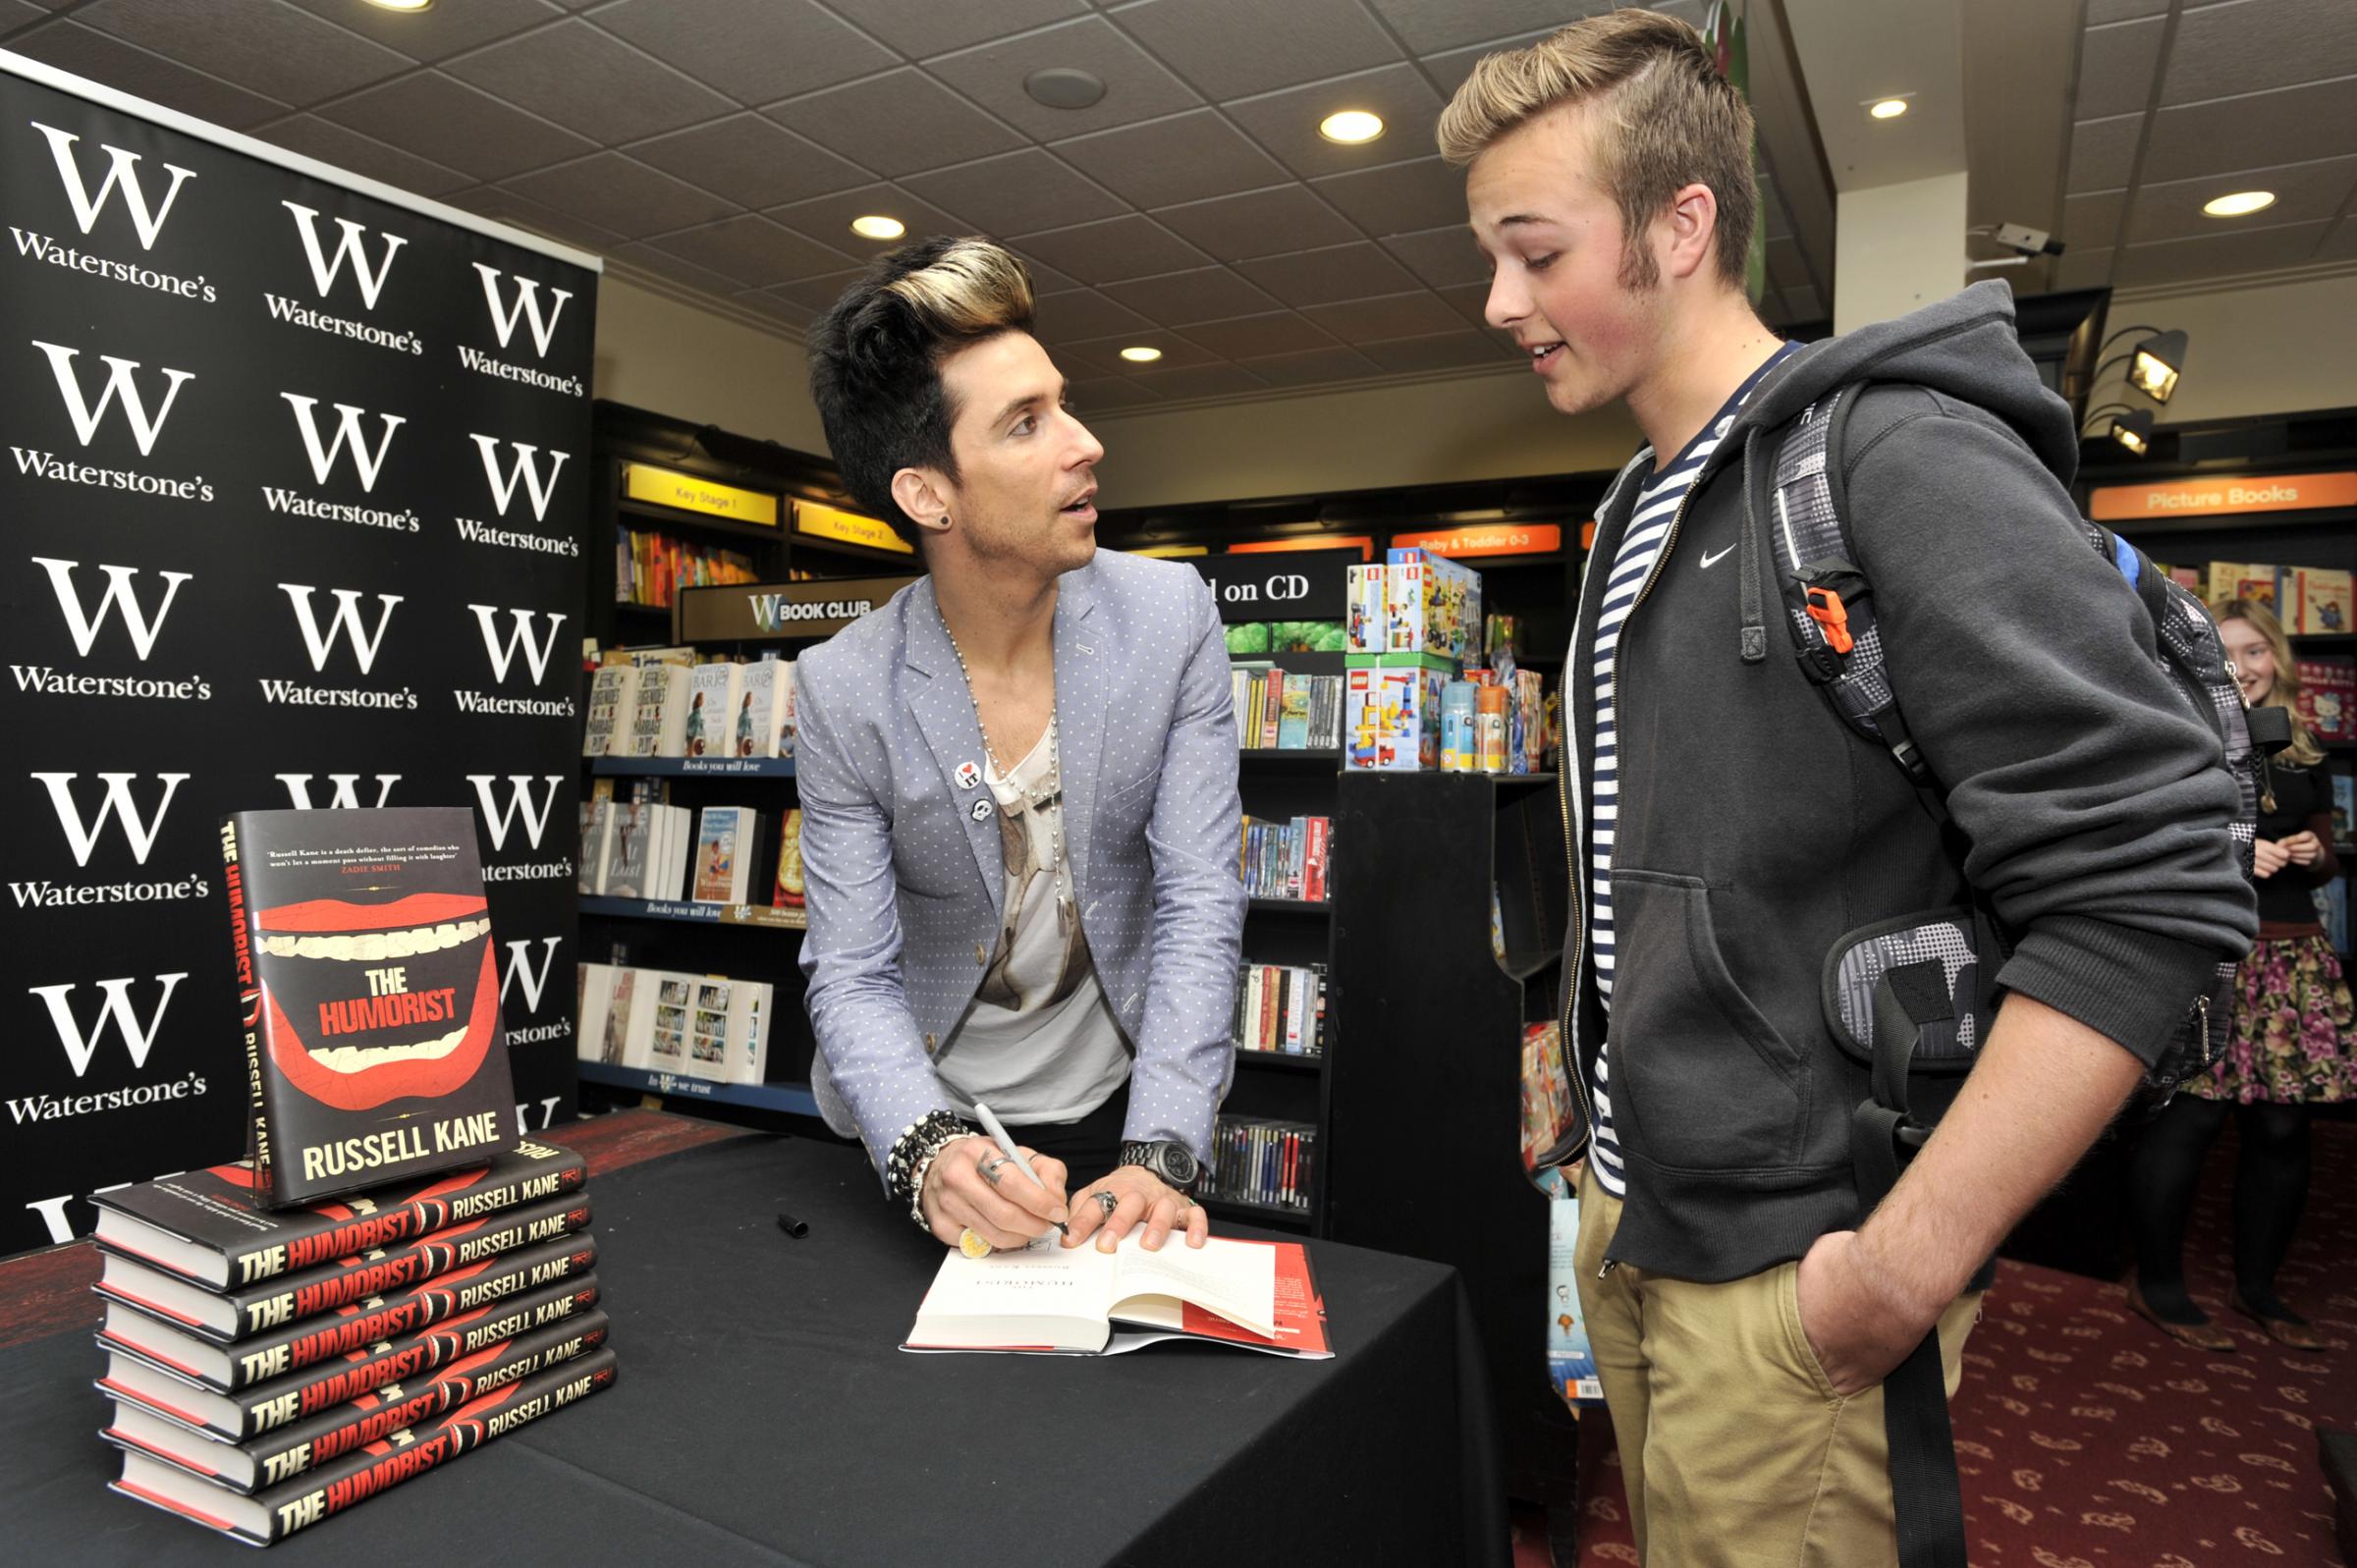 Meeting his idol - comedian Russell Kane chats with Rochford-based fan Alex Thraves while making an appearance at Southend High Streets Waterstones bookshop in May 2012